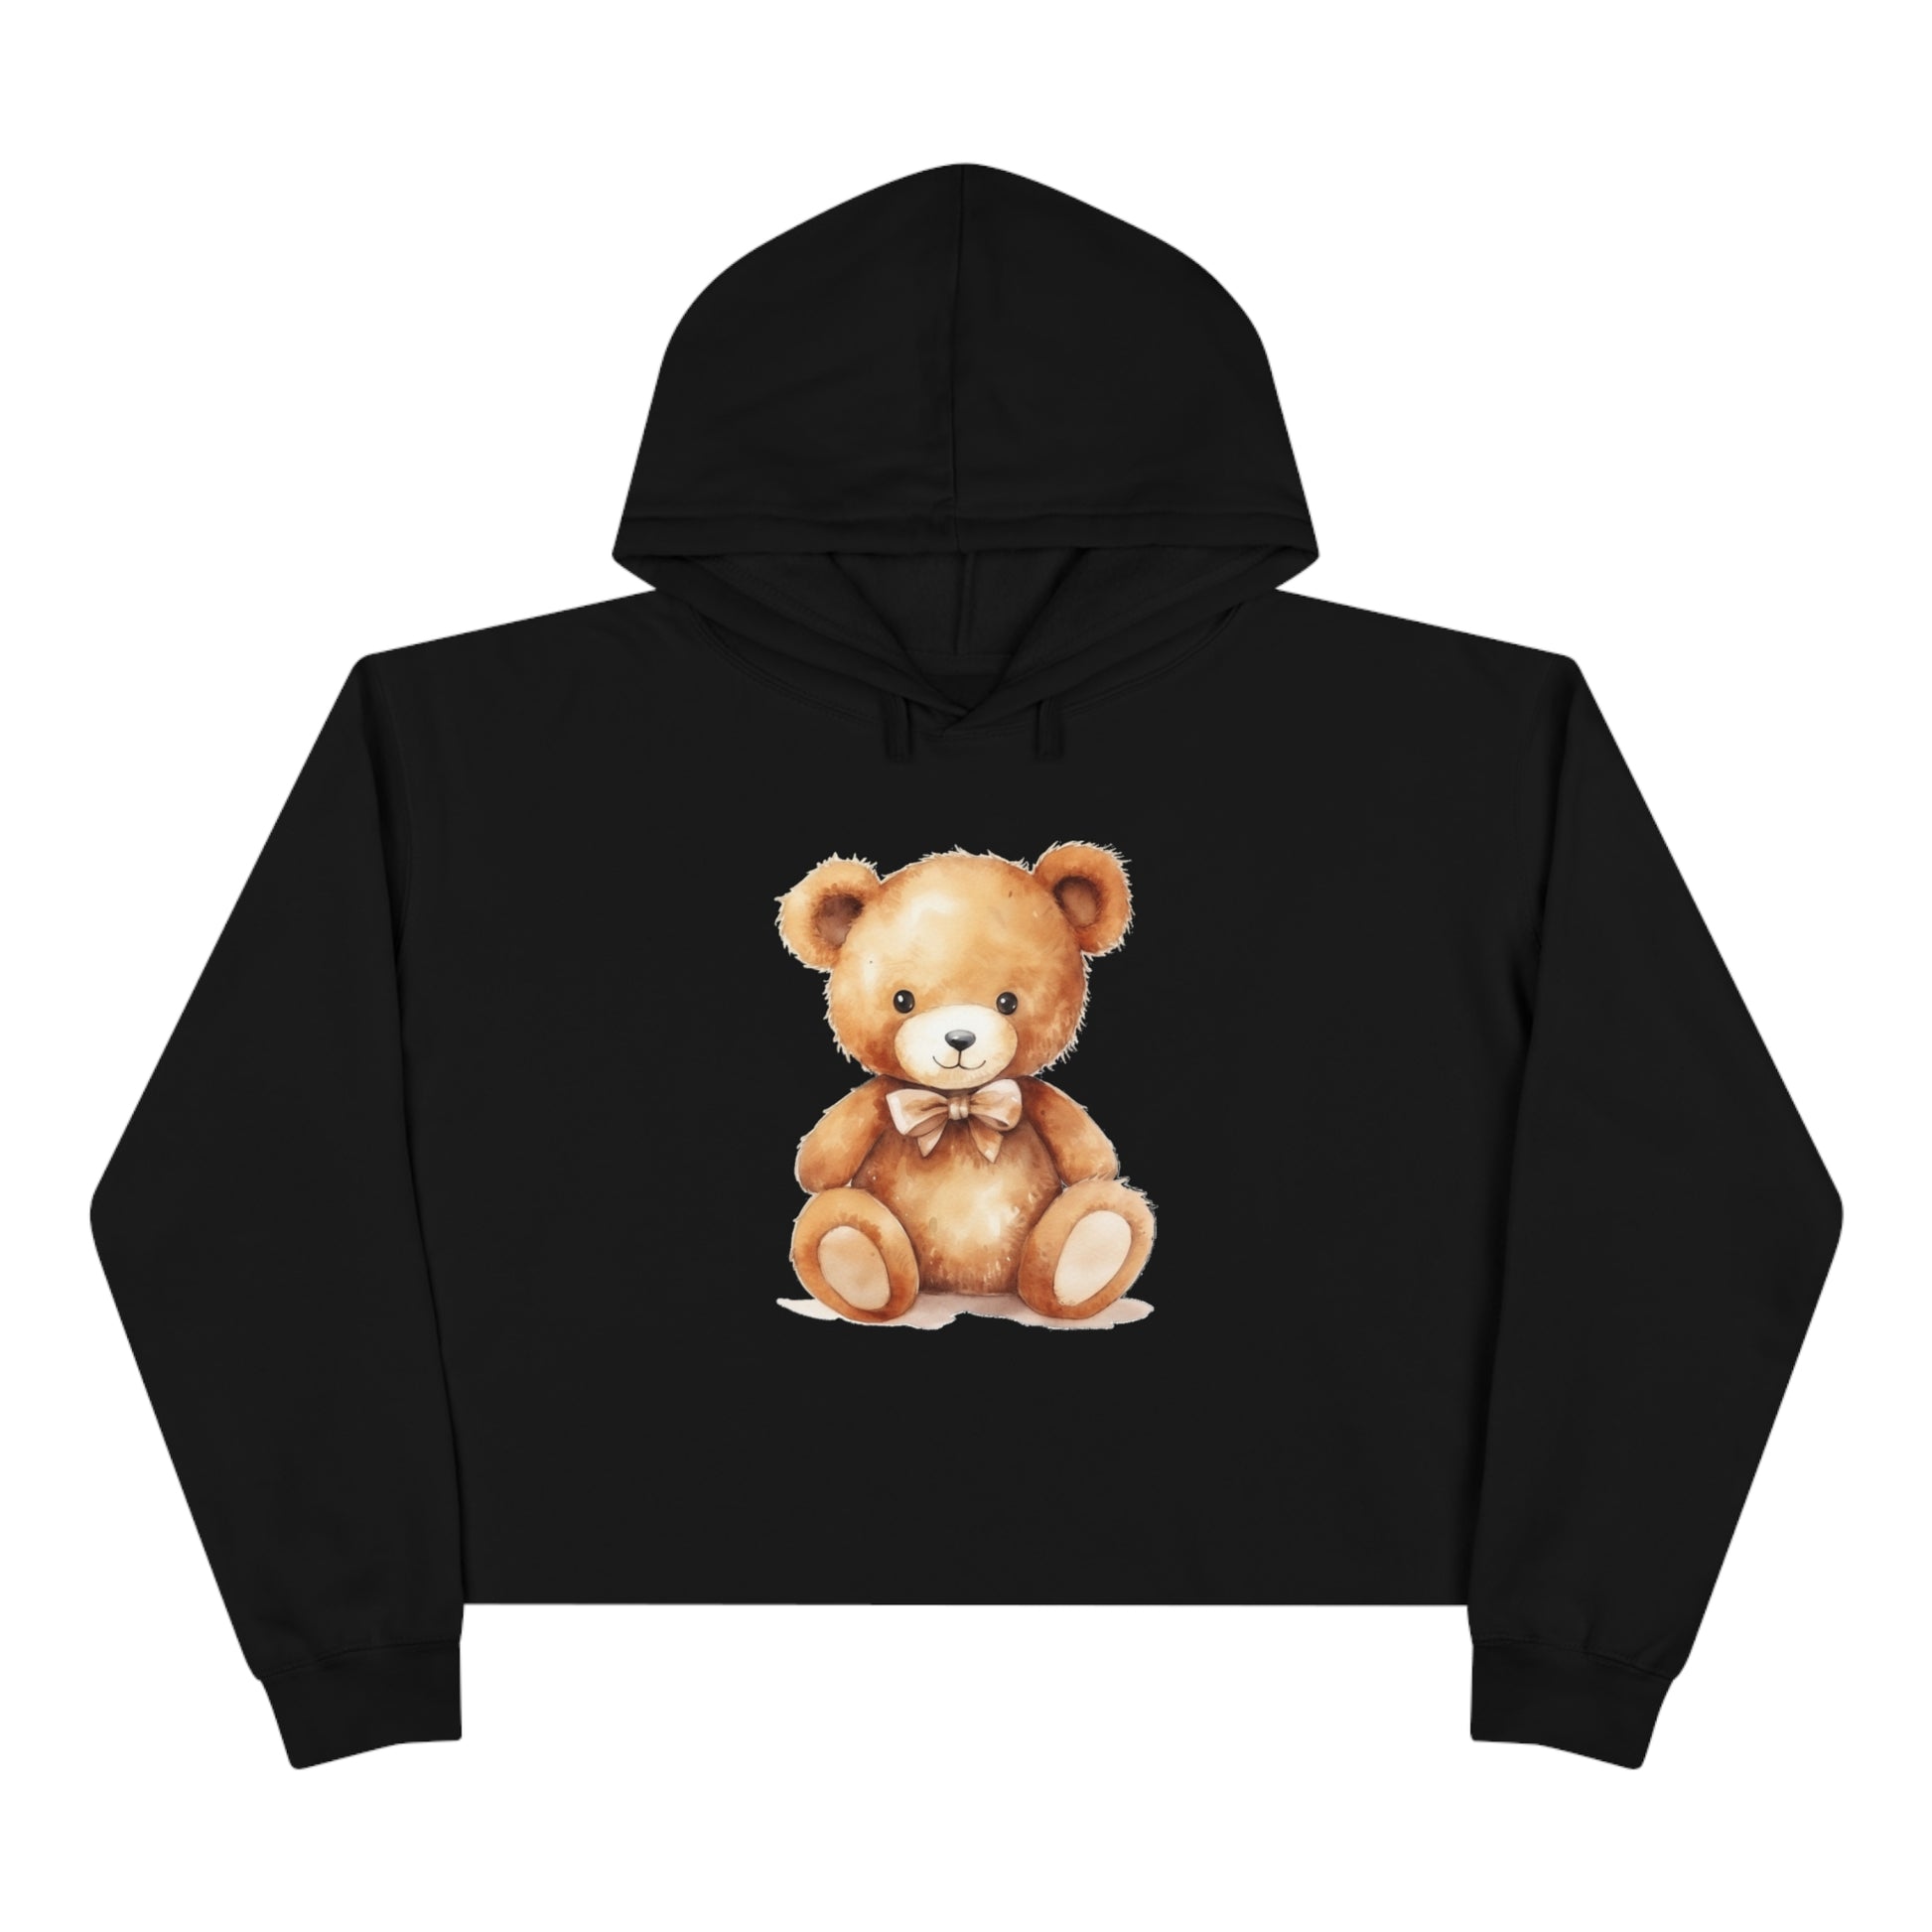 Teddy Bear Women Cropped Hoodie, Ladies Aesthetic Graphic Hooded Pullover Sweatshirt Crop Top Starcove Fashion